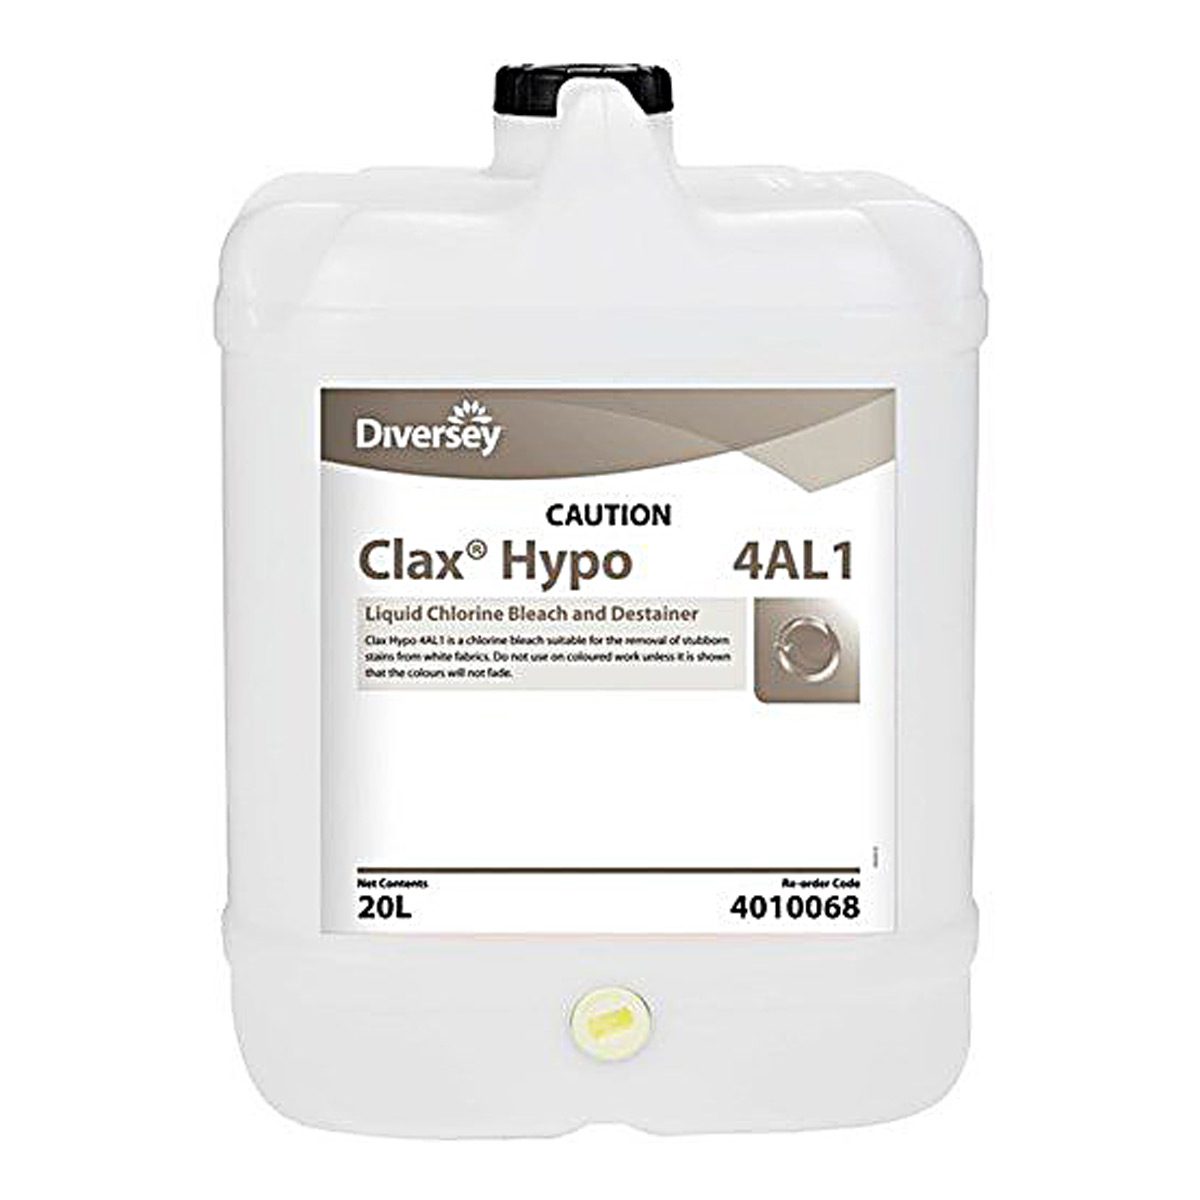 cleaning-products-laundry-diversey-clax-hypo-42A1-15L-litre-effective-bleach-suitable-low-temperature-bleaching-whites-non-coloured-linen-automatic-dosing-equipment-vjs-distributors-720323